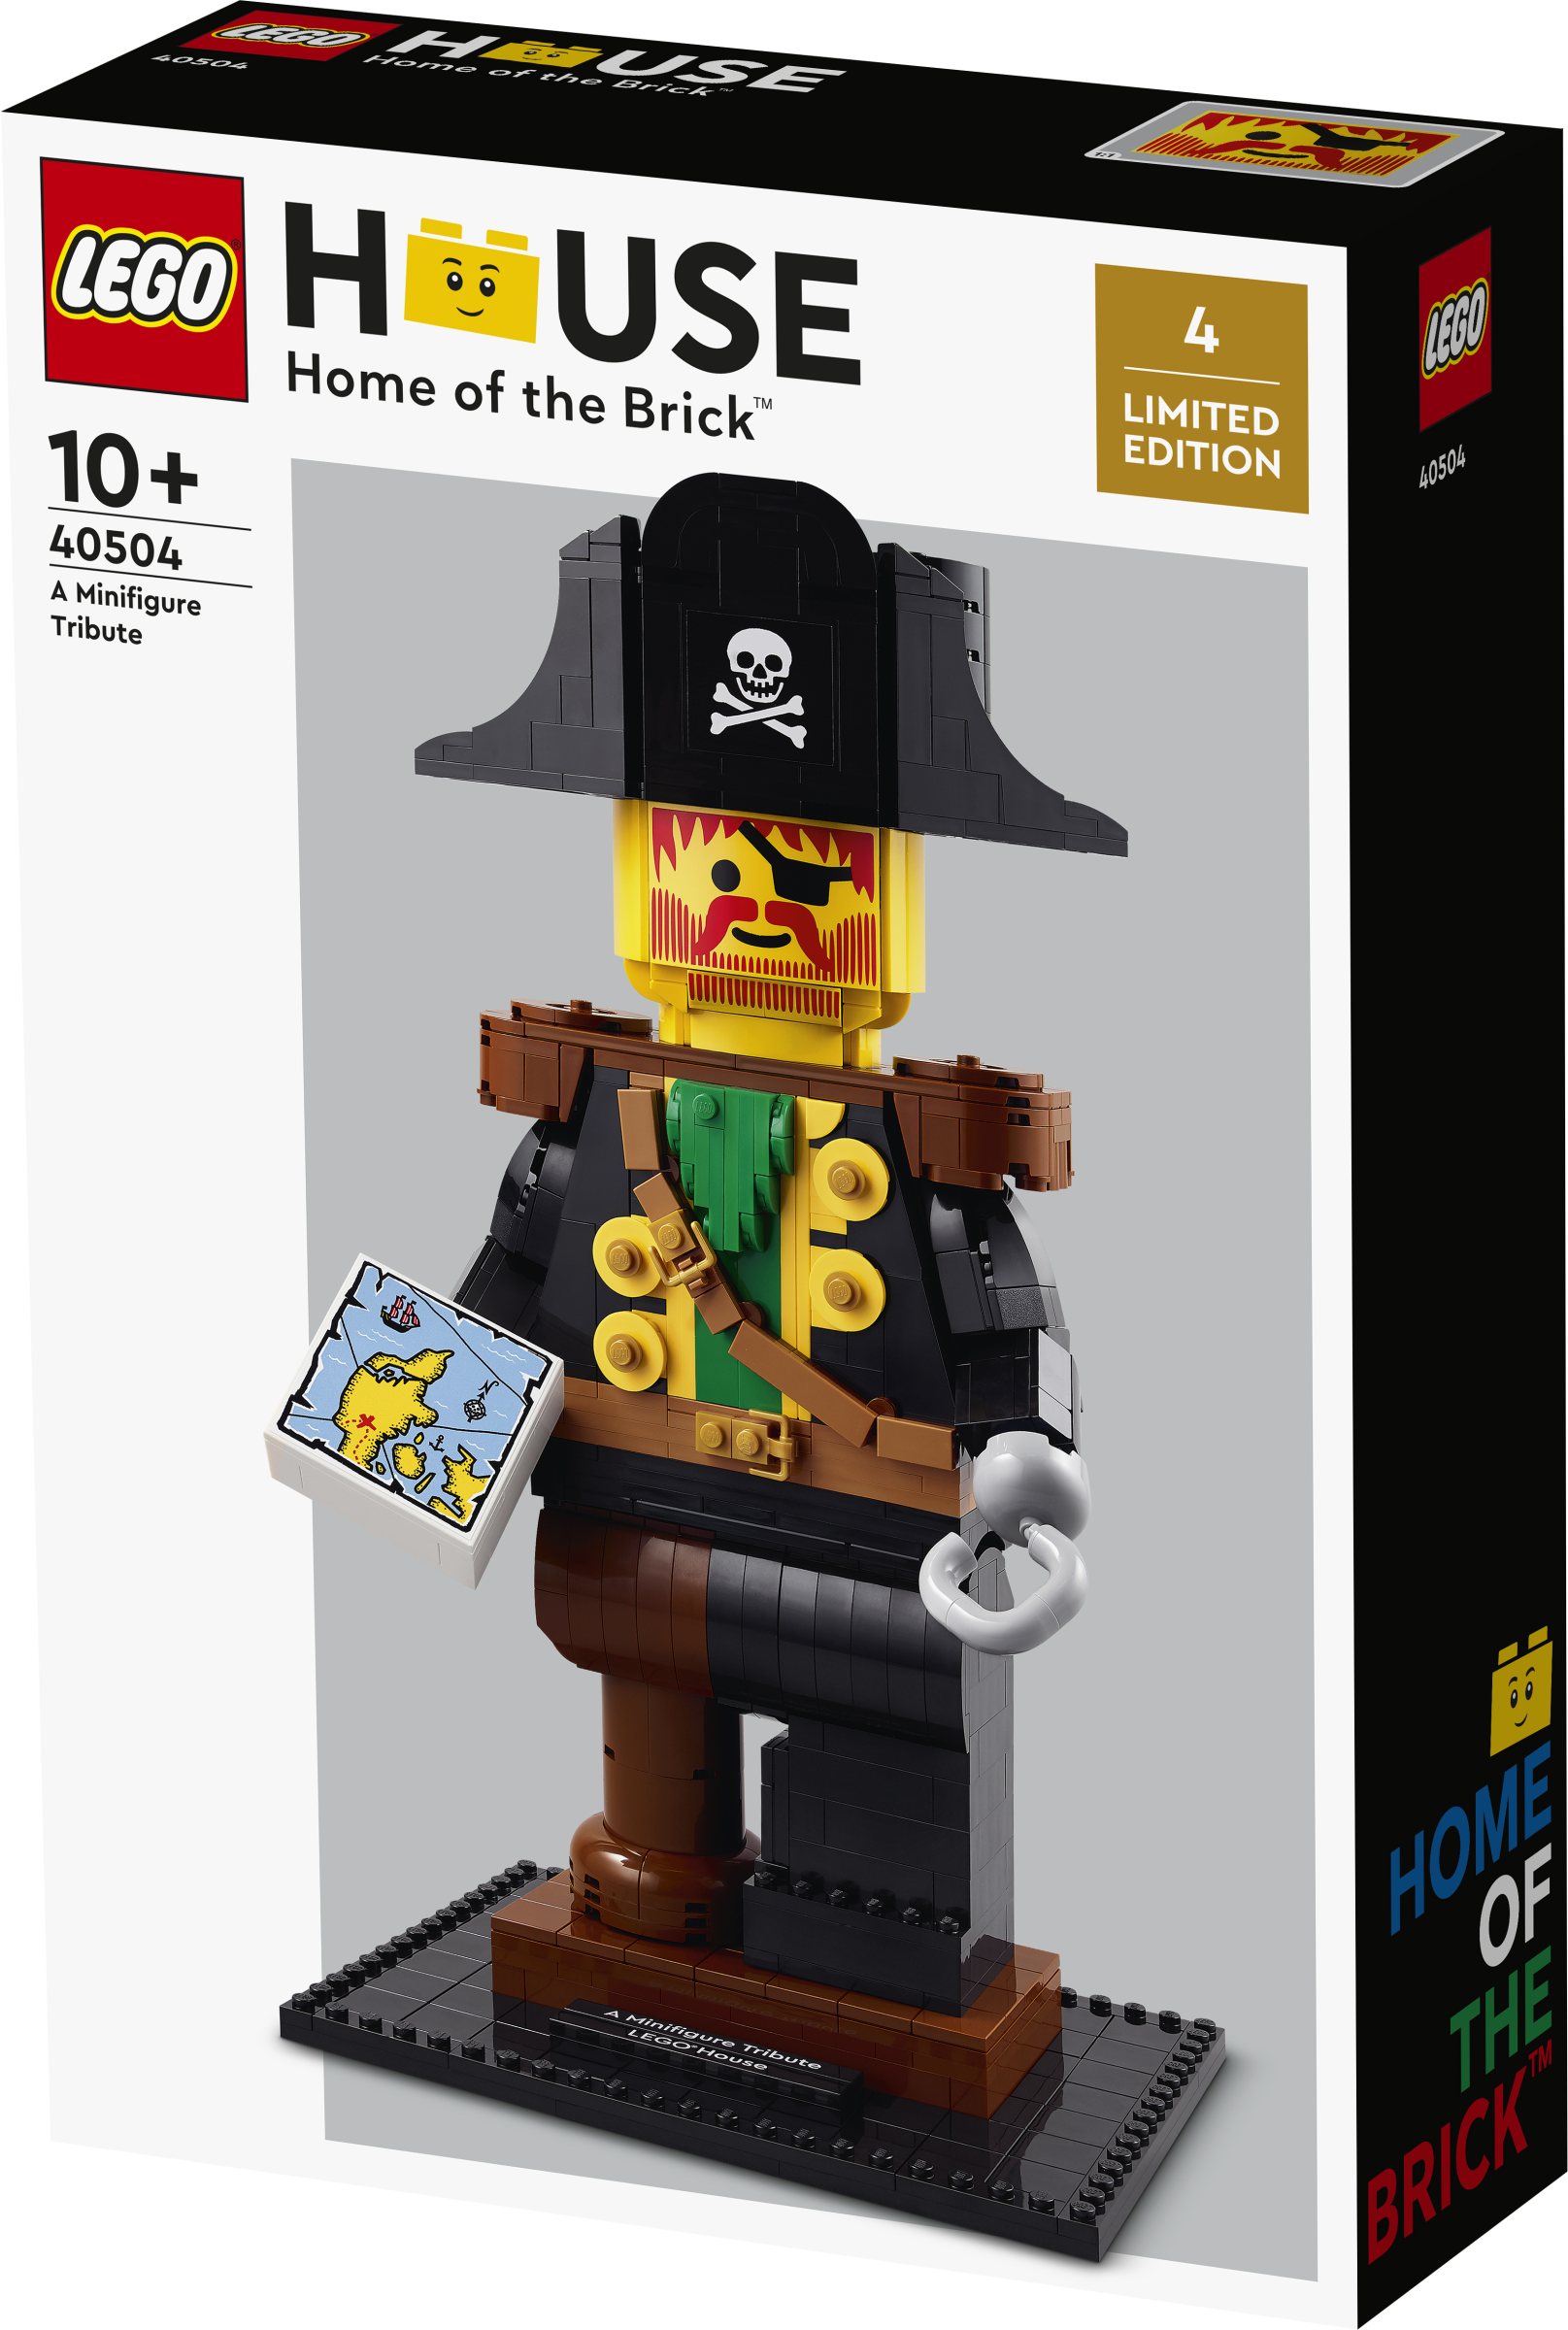 New Exclusive from LEGO House with a new Minifigure Tribute to Captain Redbeard